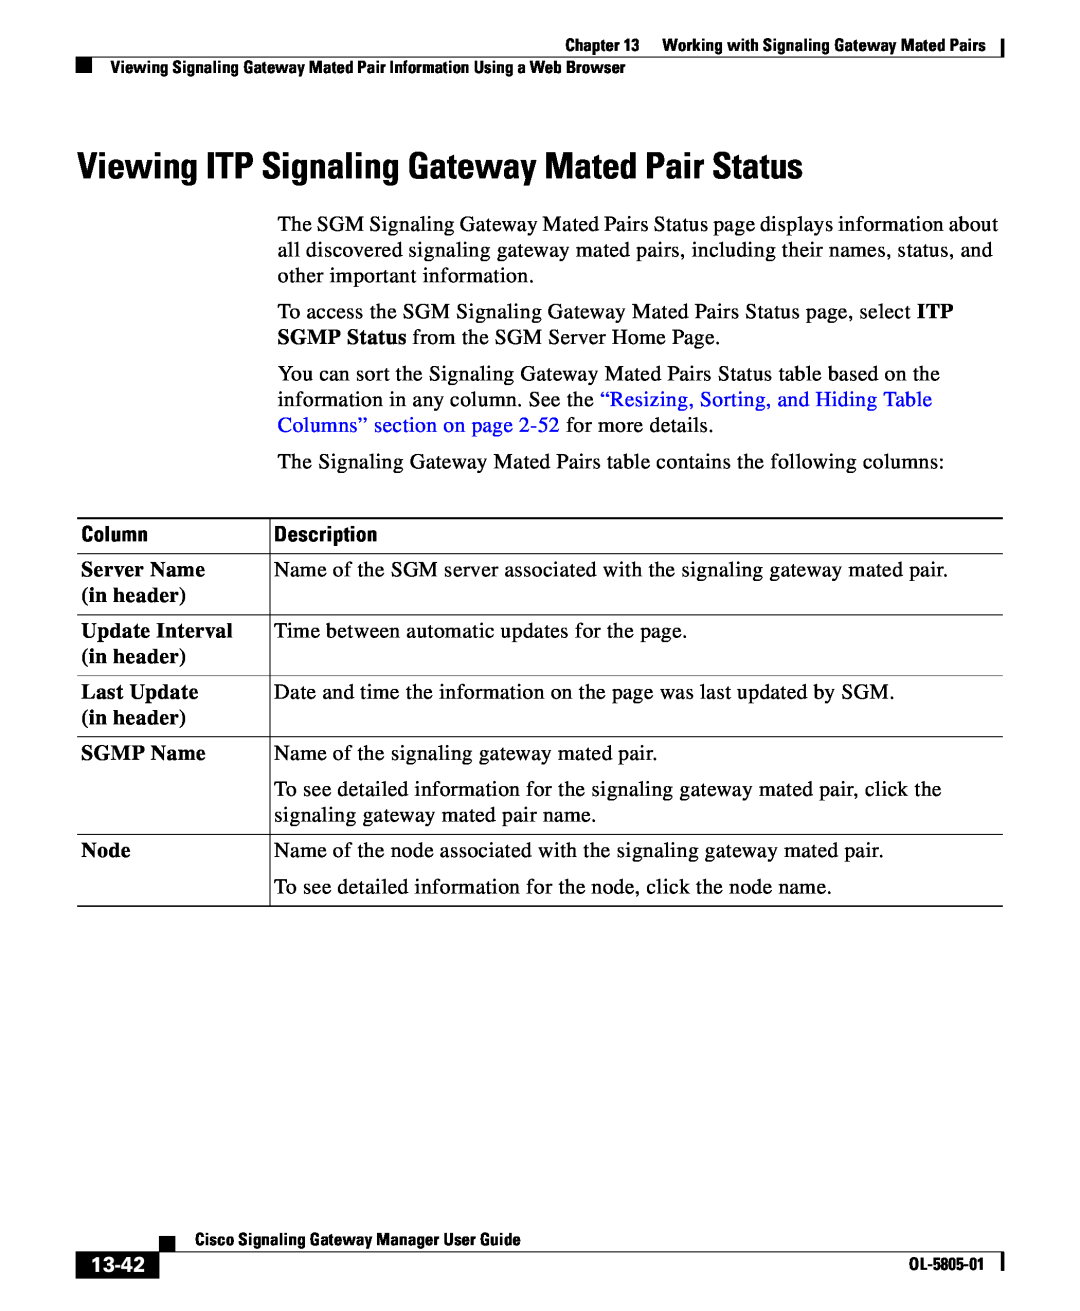 Cisco Systems OL-5805-01 Viewing ITP Signaling Gateway Mated Pair Status, Columns” section on page 2-52 for more details 